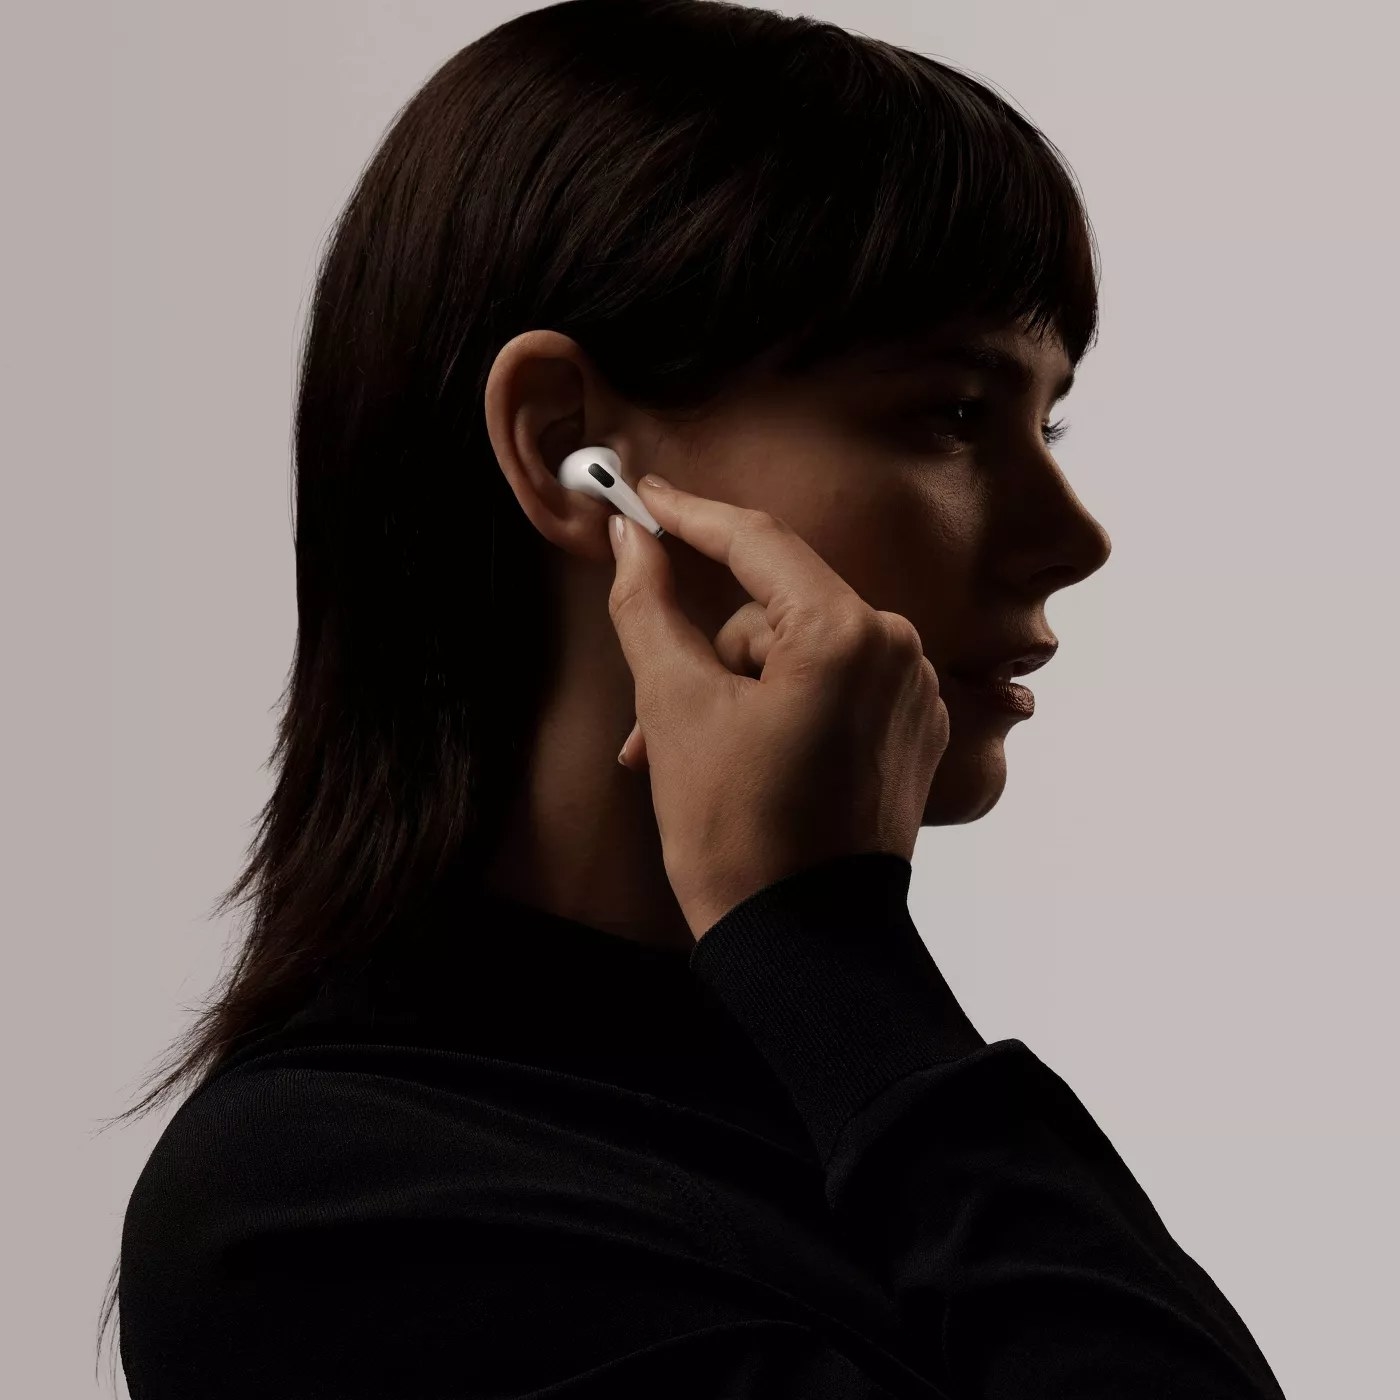 A side profile view of a model placing an Airpod in their ear